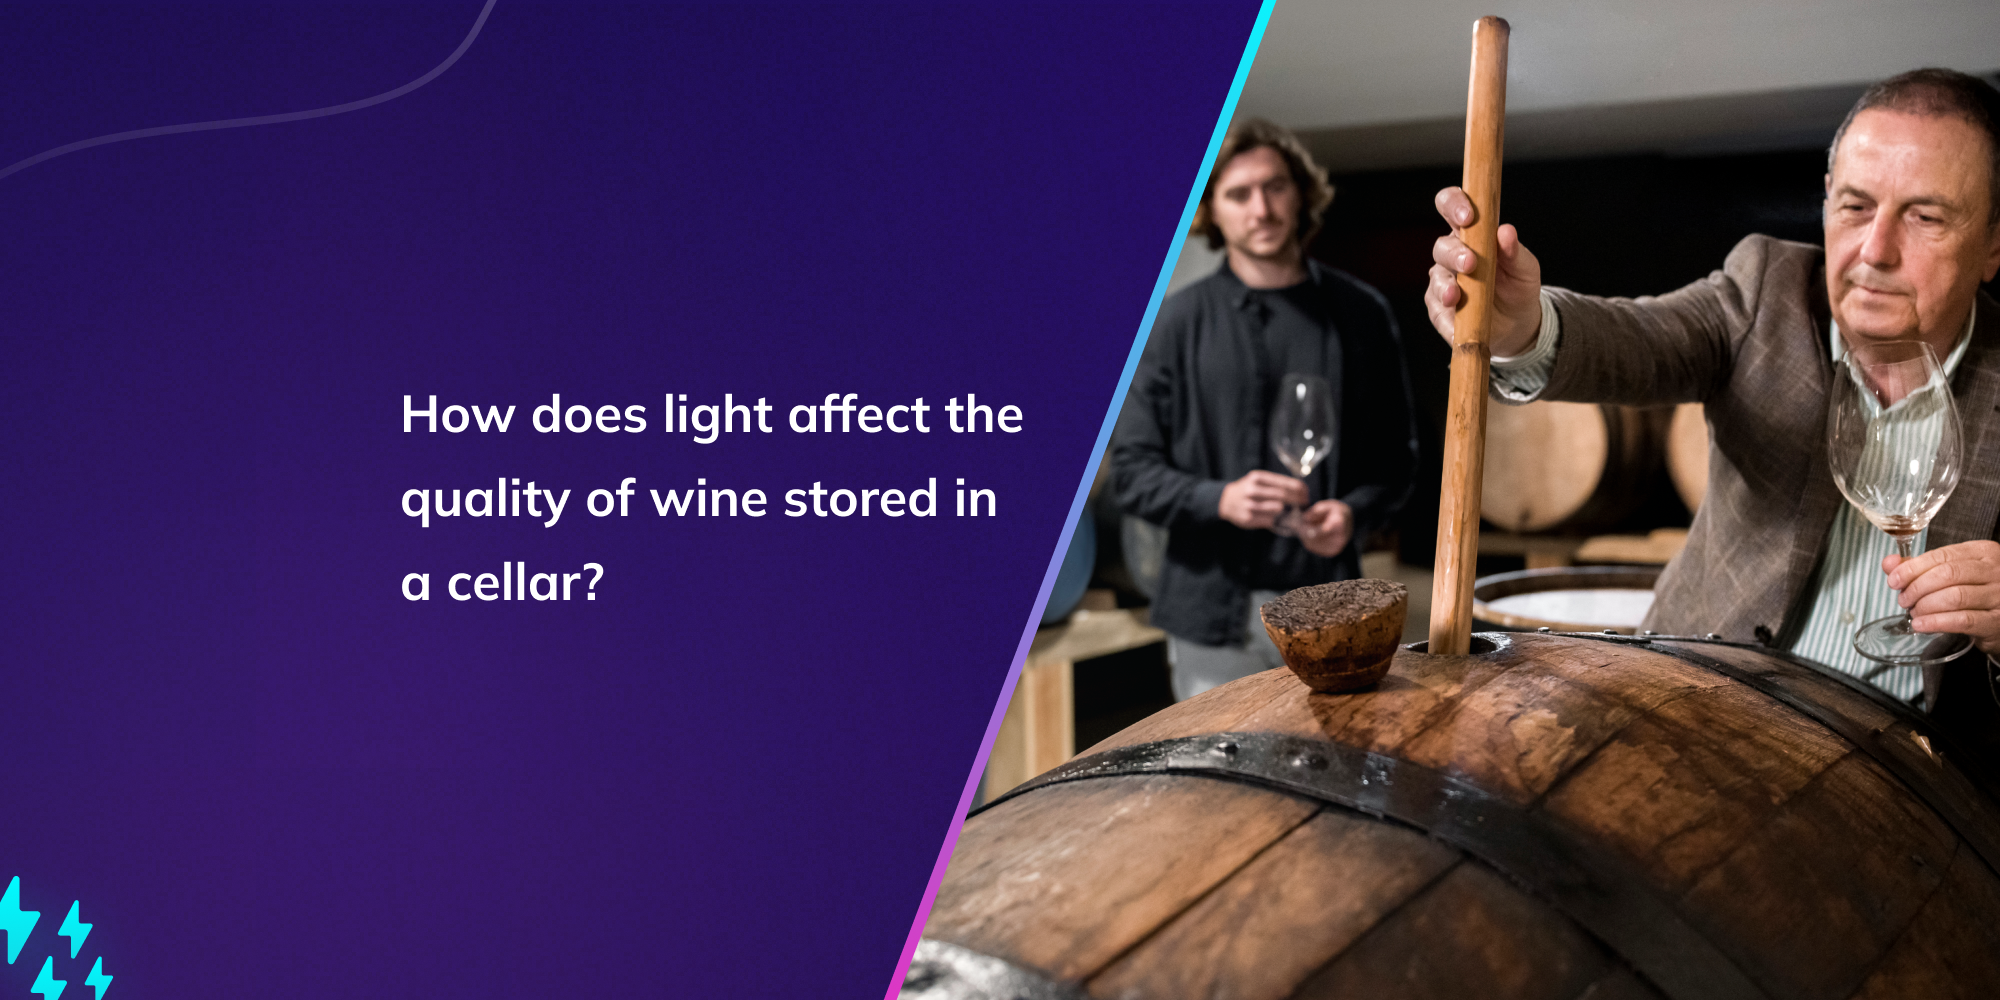 How does light affect the quality of wine stored in a cellar?